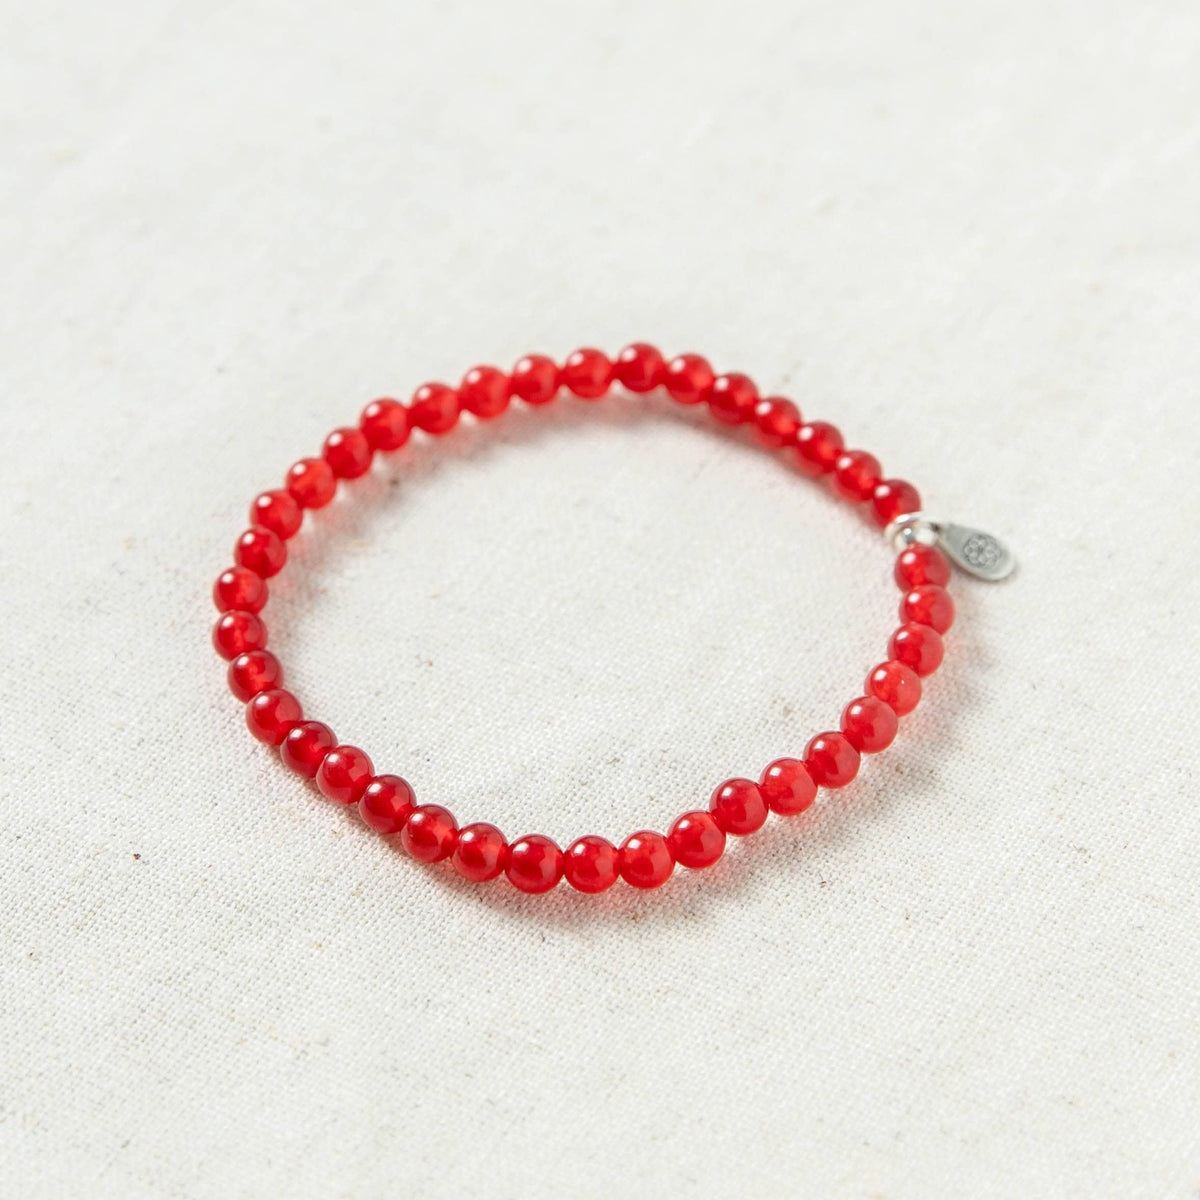 Tiny Rituals Red Jade Energy Bracelet by Tiny Rituals